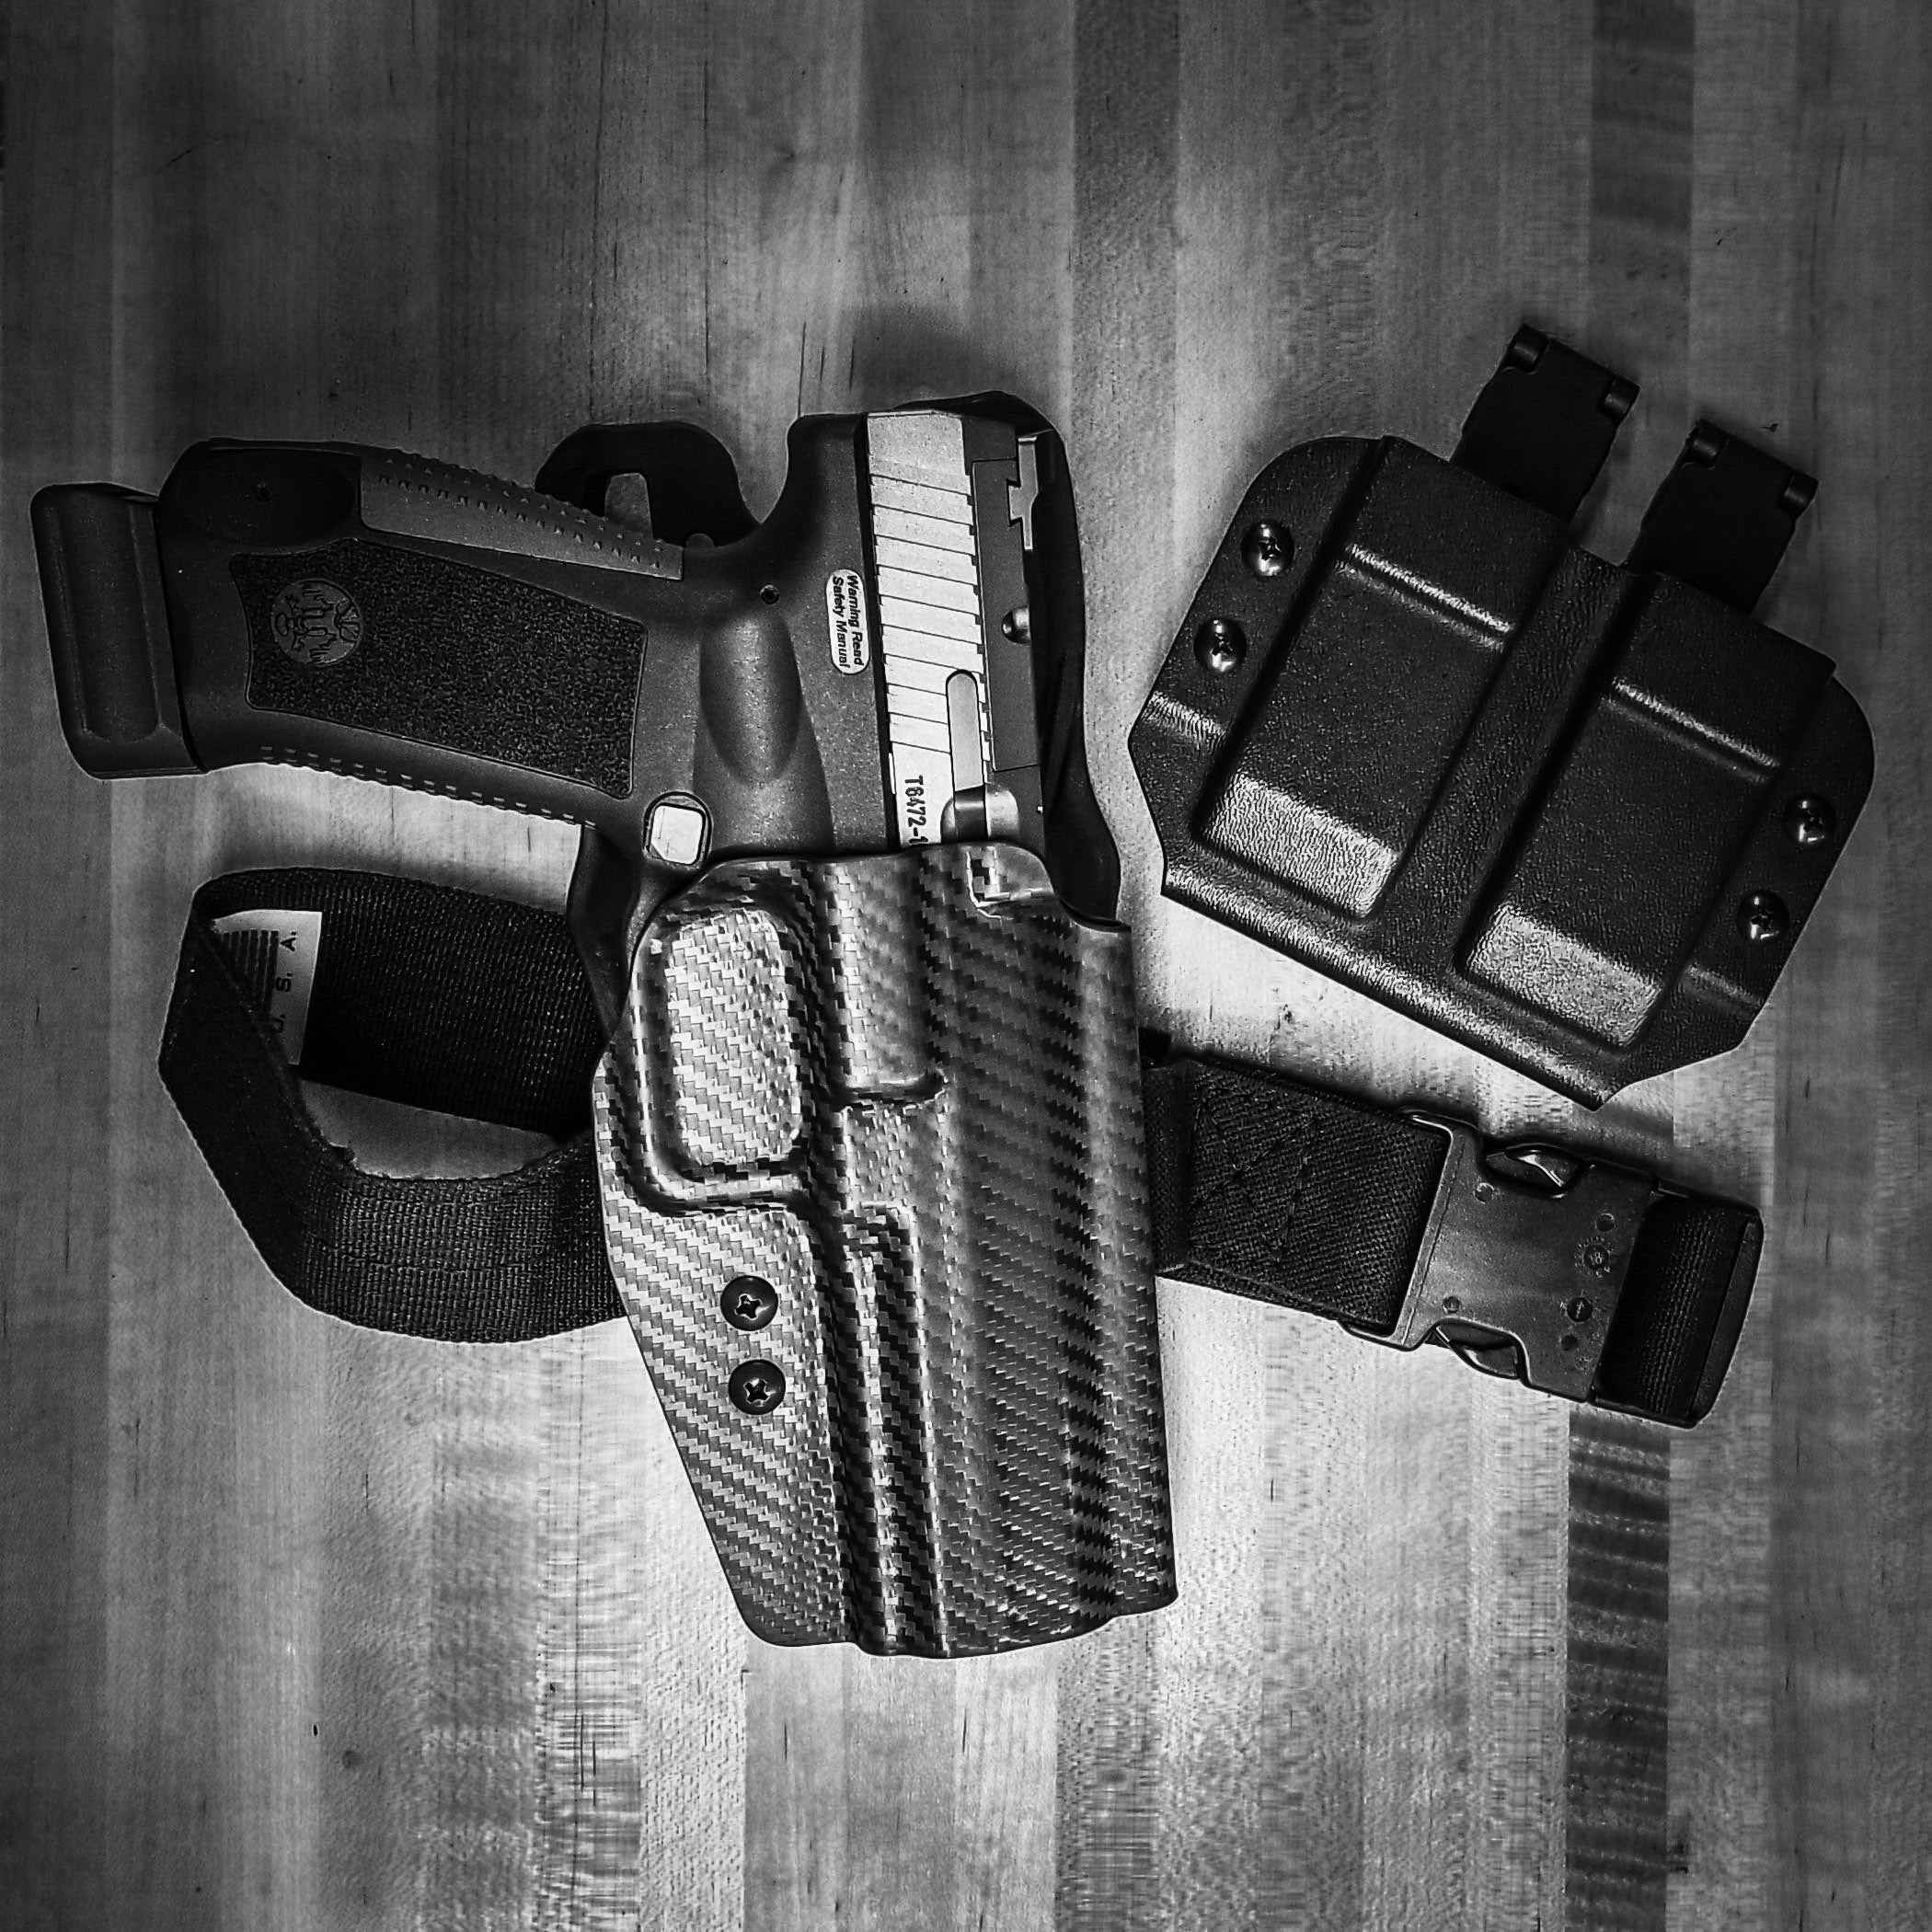 For the best OWB Outside Waistband Duty and Competition Holster designed to fit the Canik TP9 TP9SFX full-size pistols, shop Four Brothers Holsters. Perfect for USPSA, 3-Gun, Steel Challenge, and other competitive shooting sports. Adjustable retention, Open muzzle for threaded barrels. Made in the USA